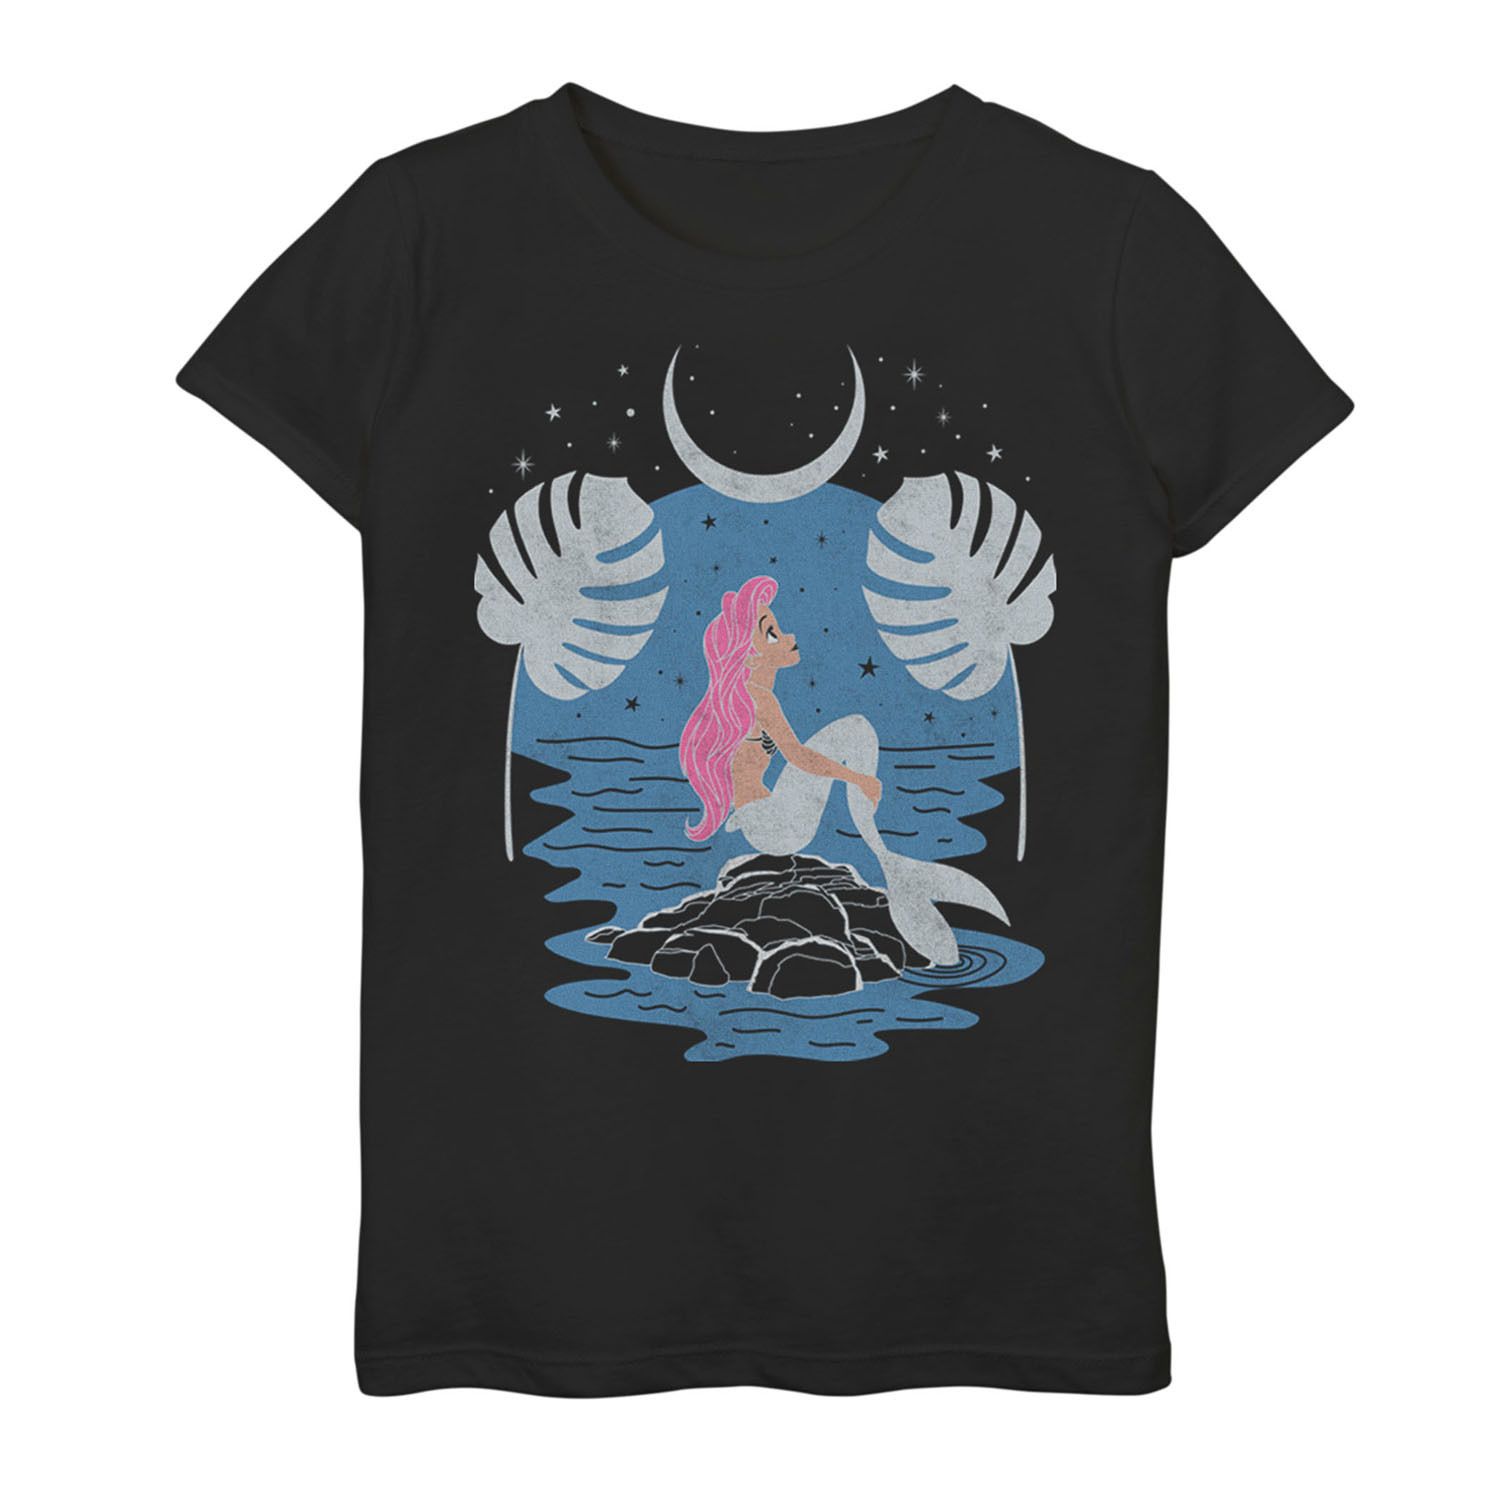 Image for Disney Girls 7-16 Princesses Celestial Ariel Graphic Tee at Kohl's.